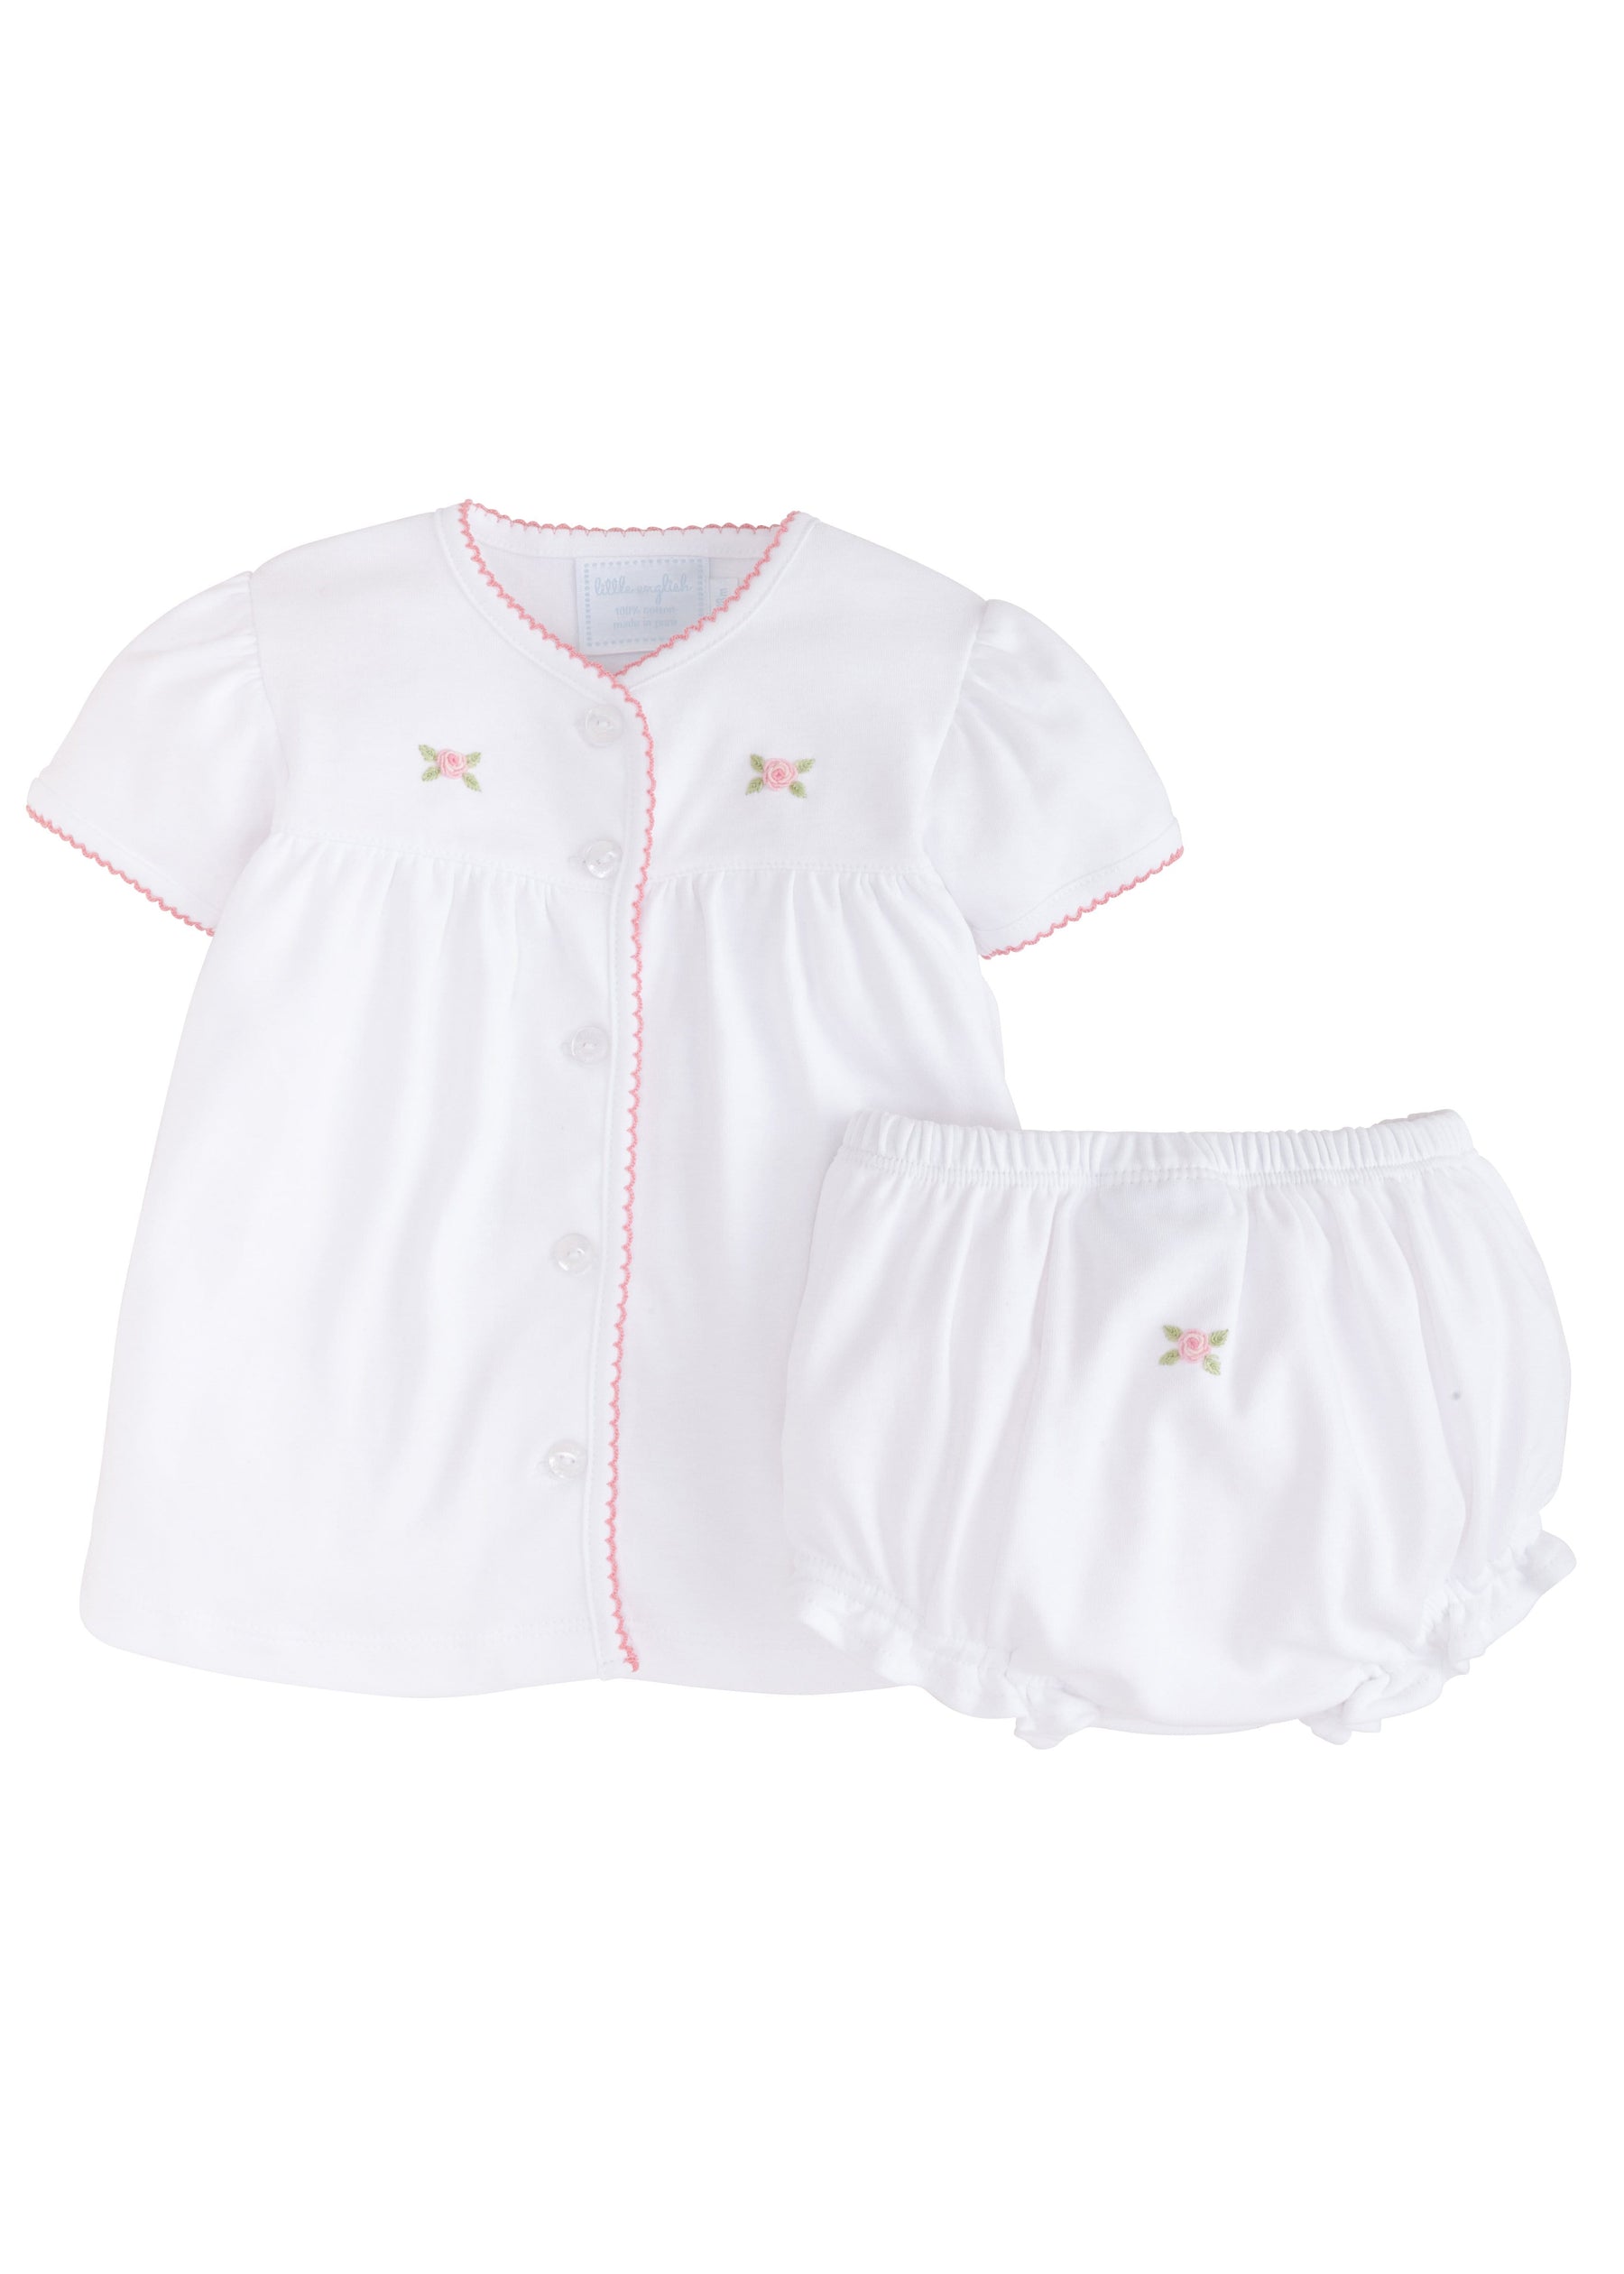 seguridadindustrialcr classic and traditional baby clothing, little girl rose two piece set